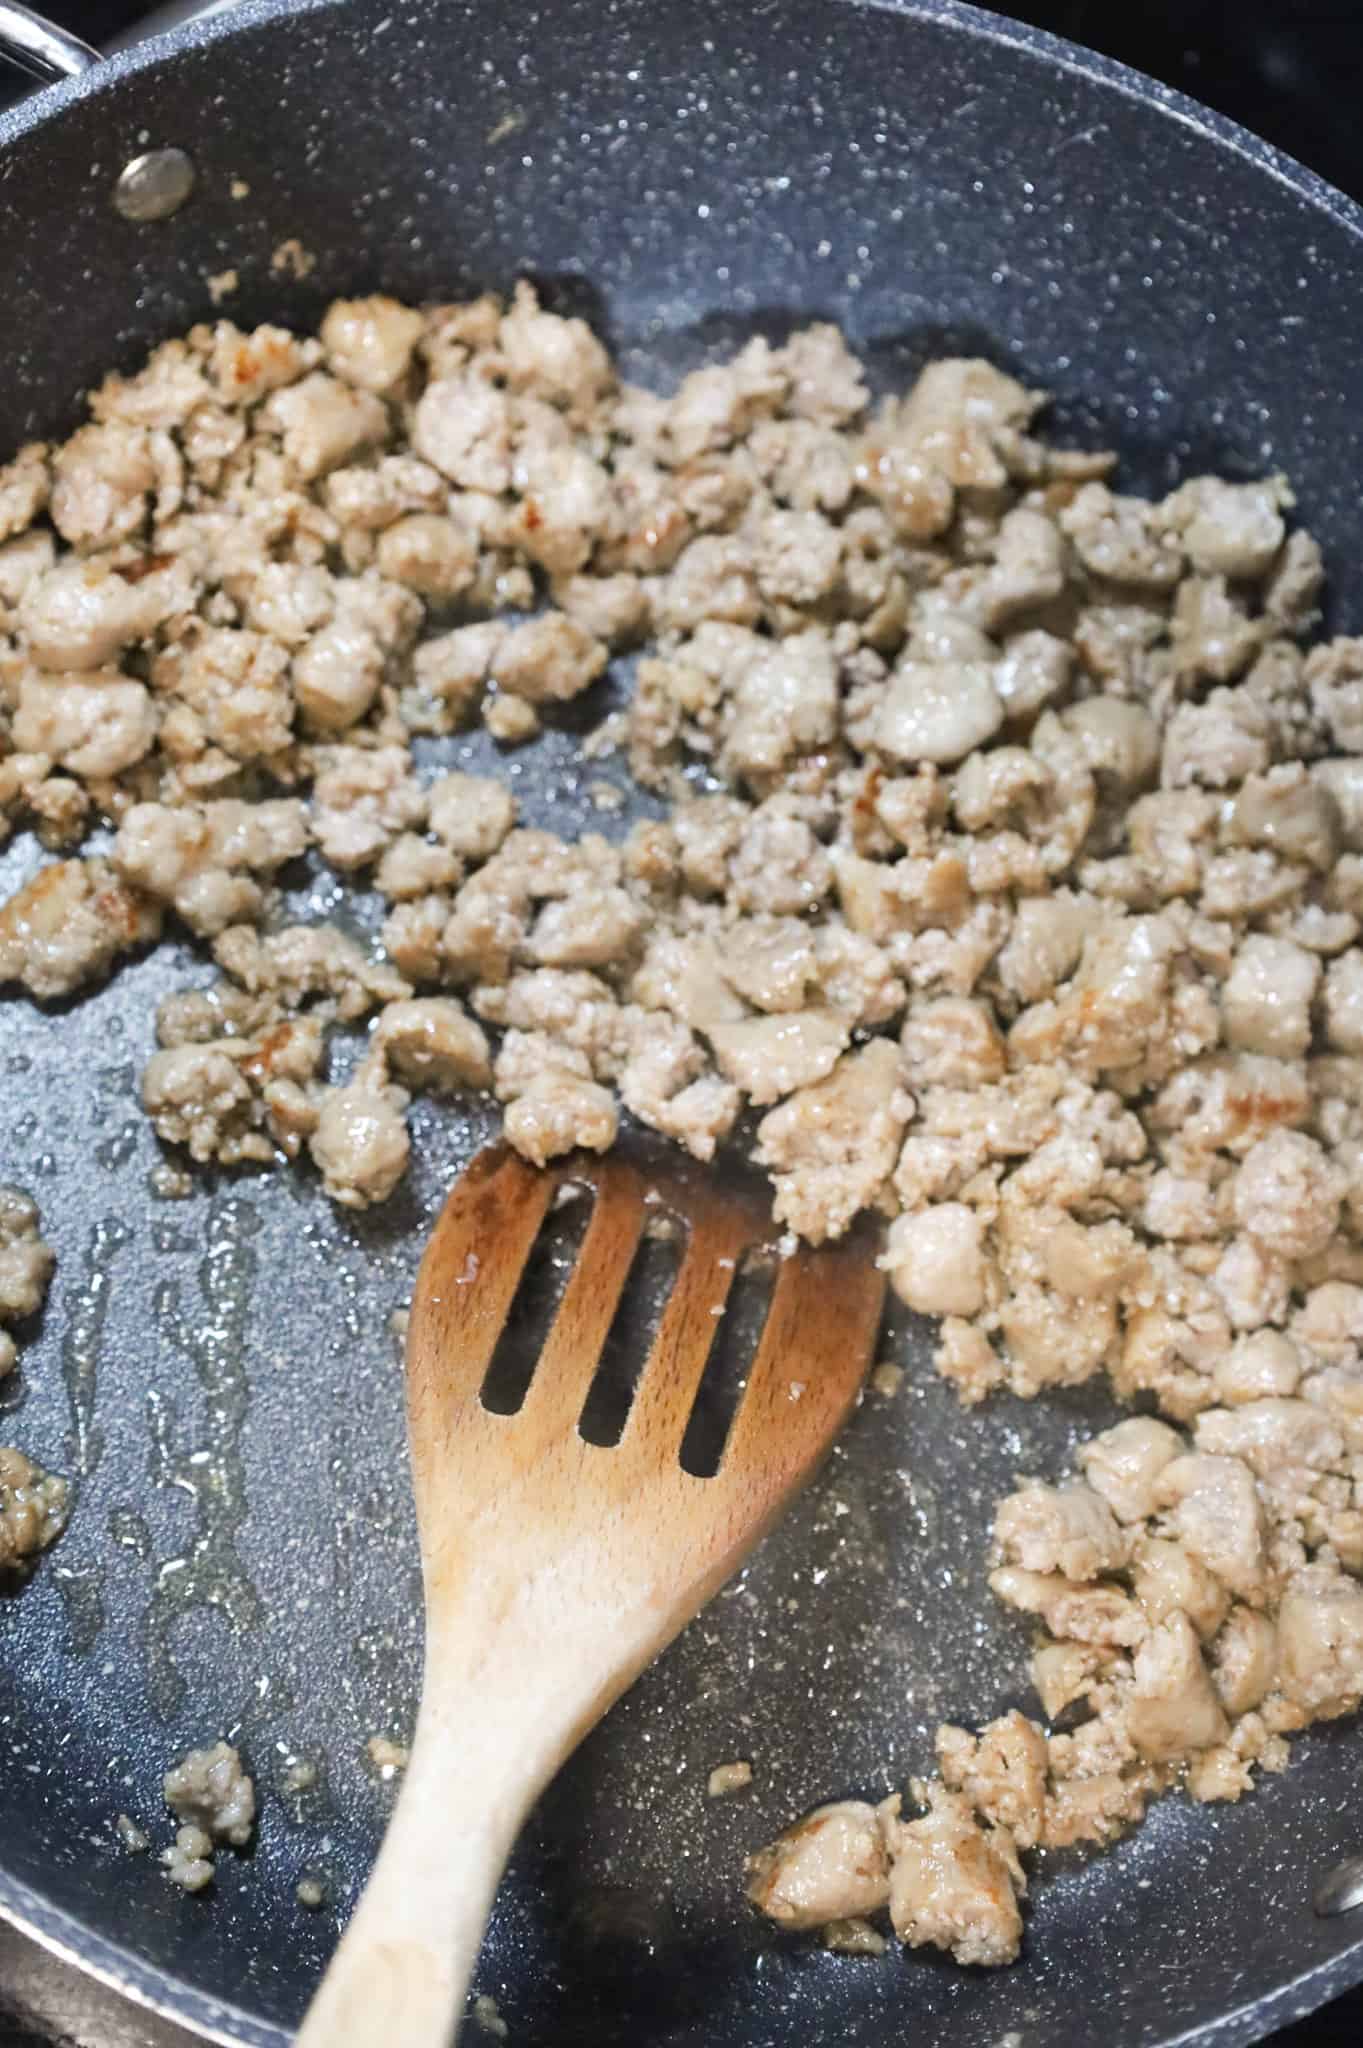 crumbled sausage cooking in a skillet